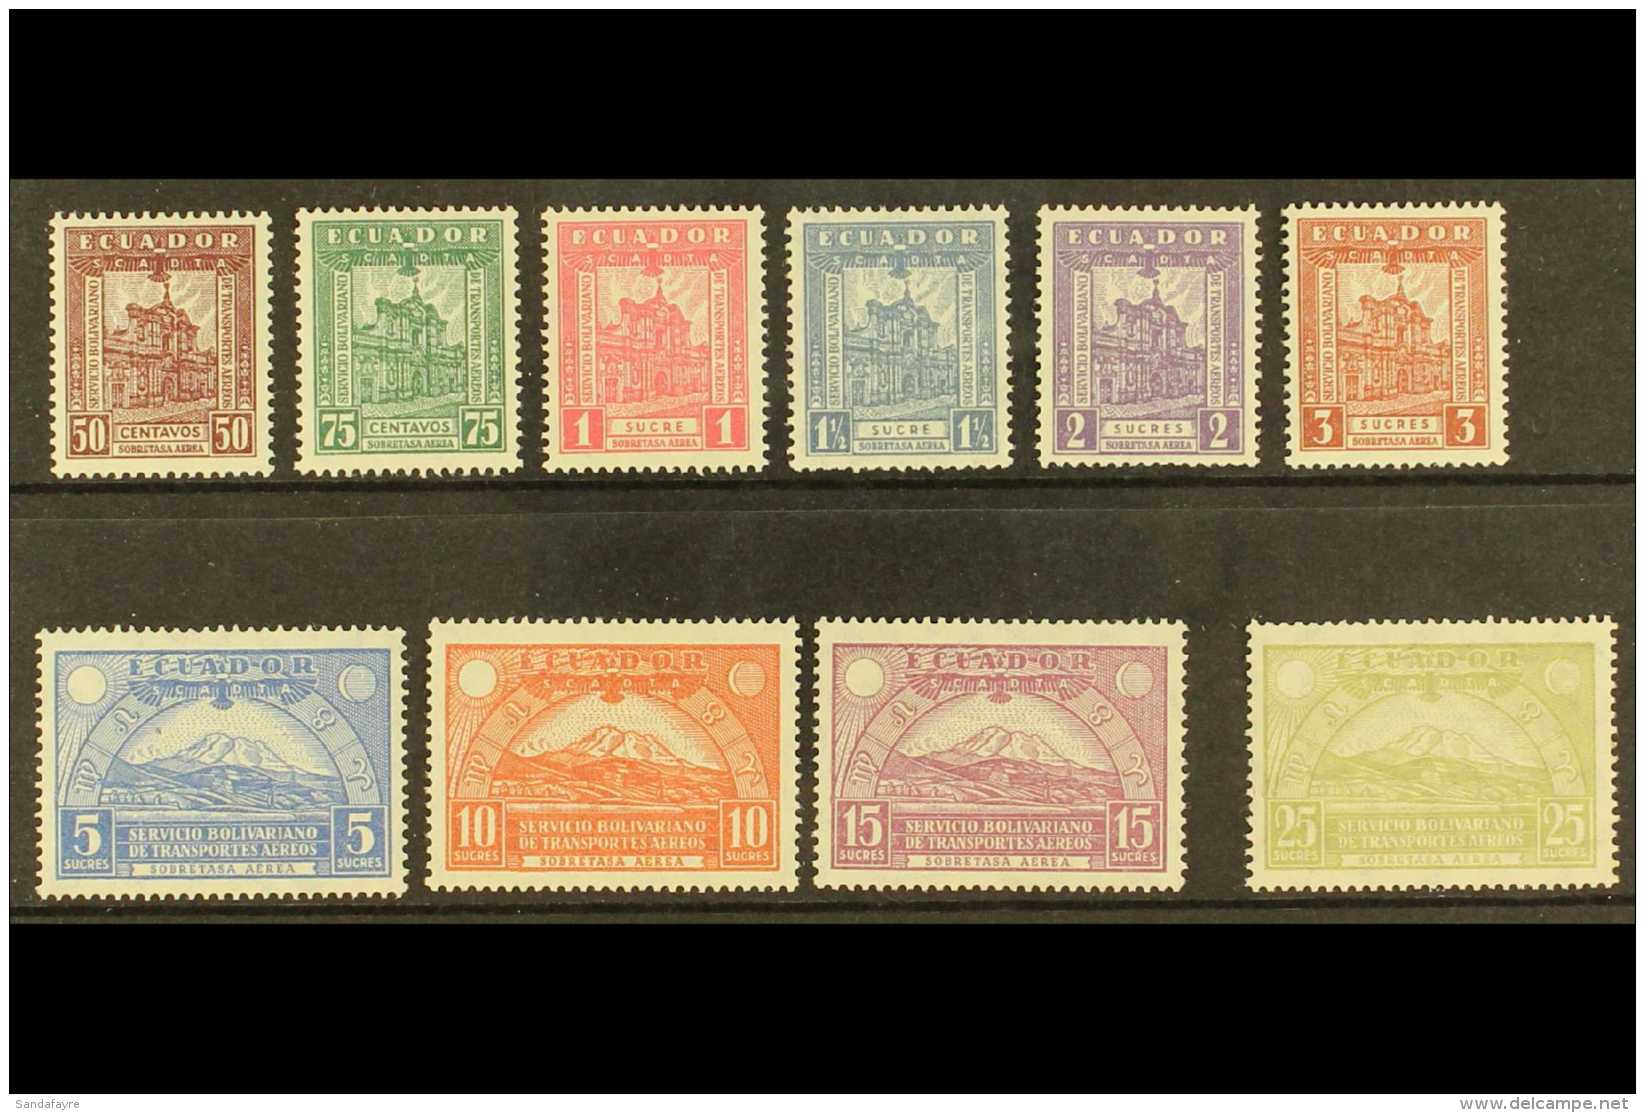 SCADTA 1929 Air Complete Set (Scott C16/25, SG 12/21, 7/16), Never Hinged Mint, Very Fresh. (10 Stamps) For More... - Equateur